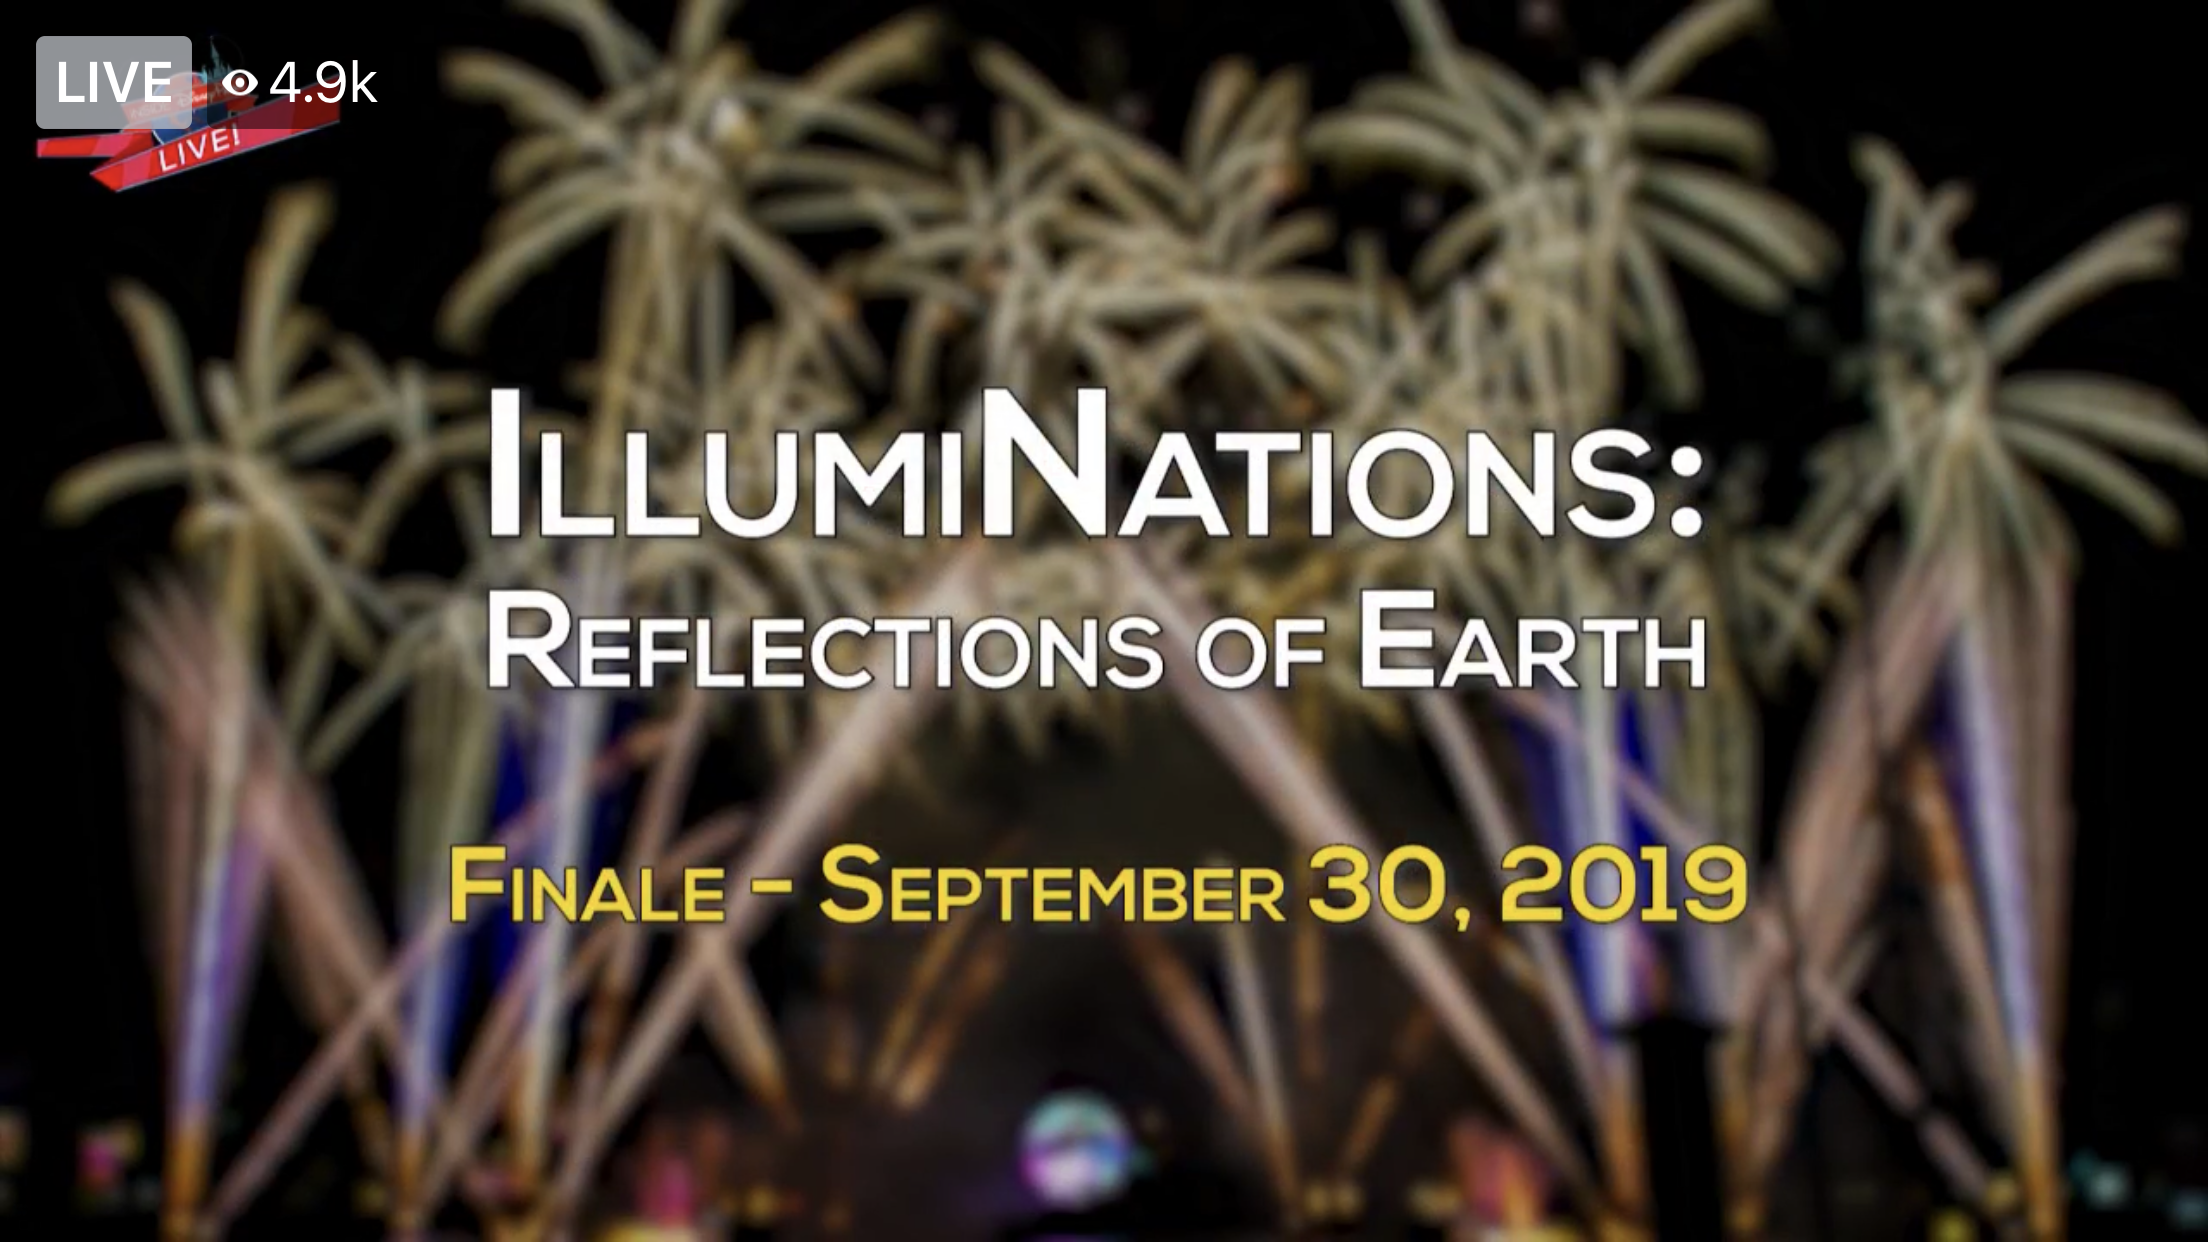 Disney Announces Ending Date for IllumiNations at Epcot